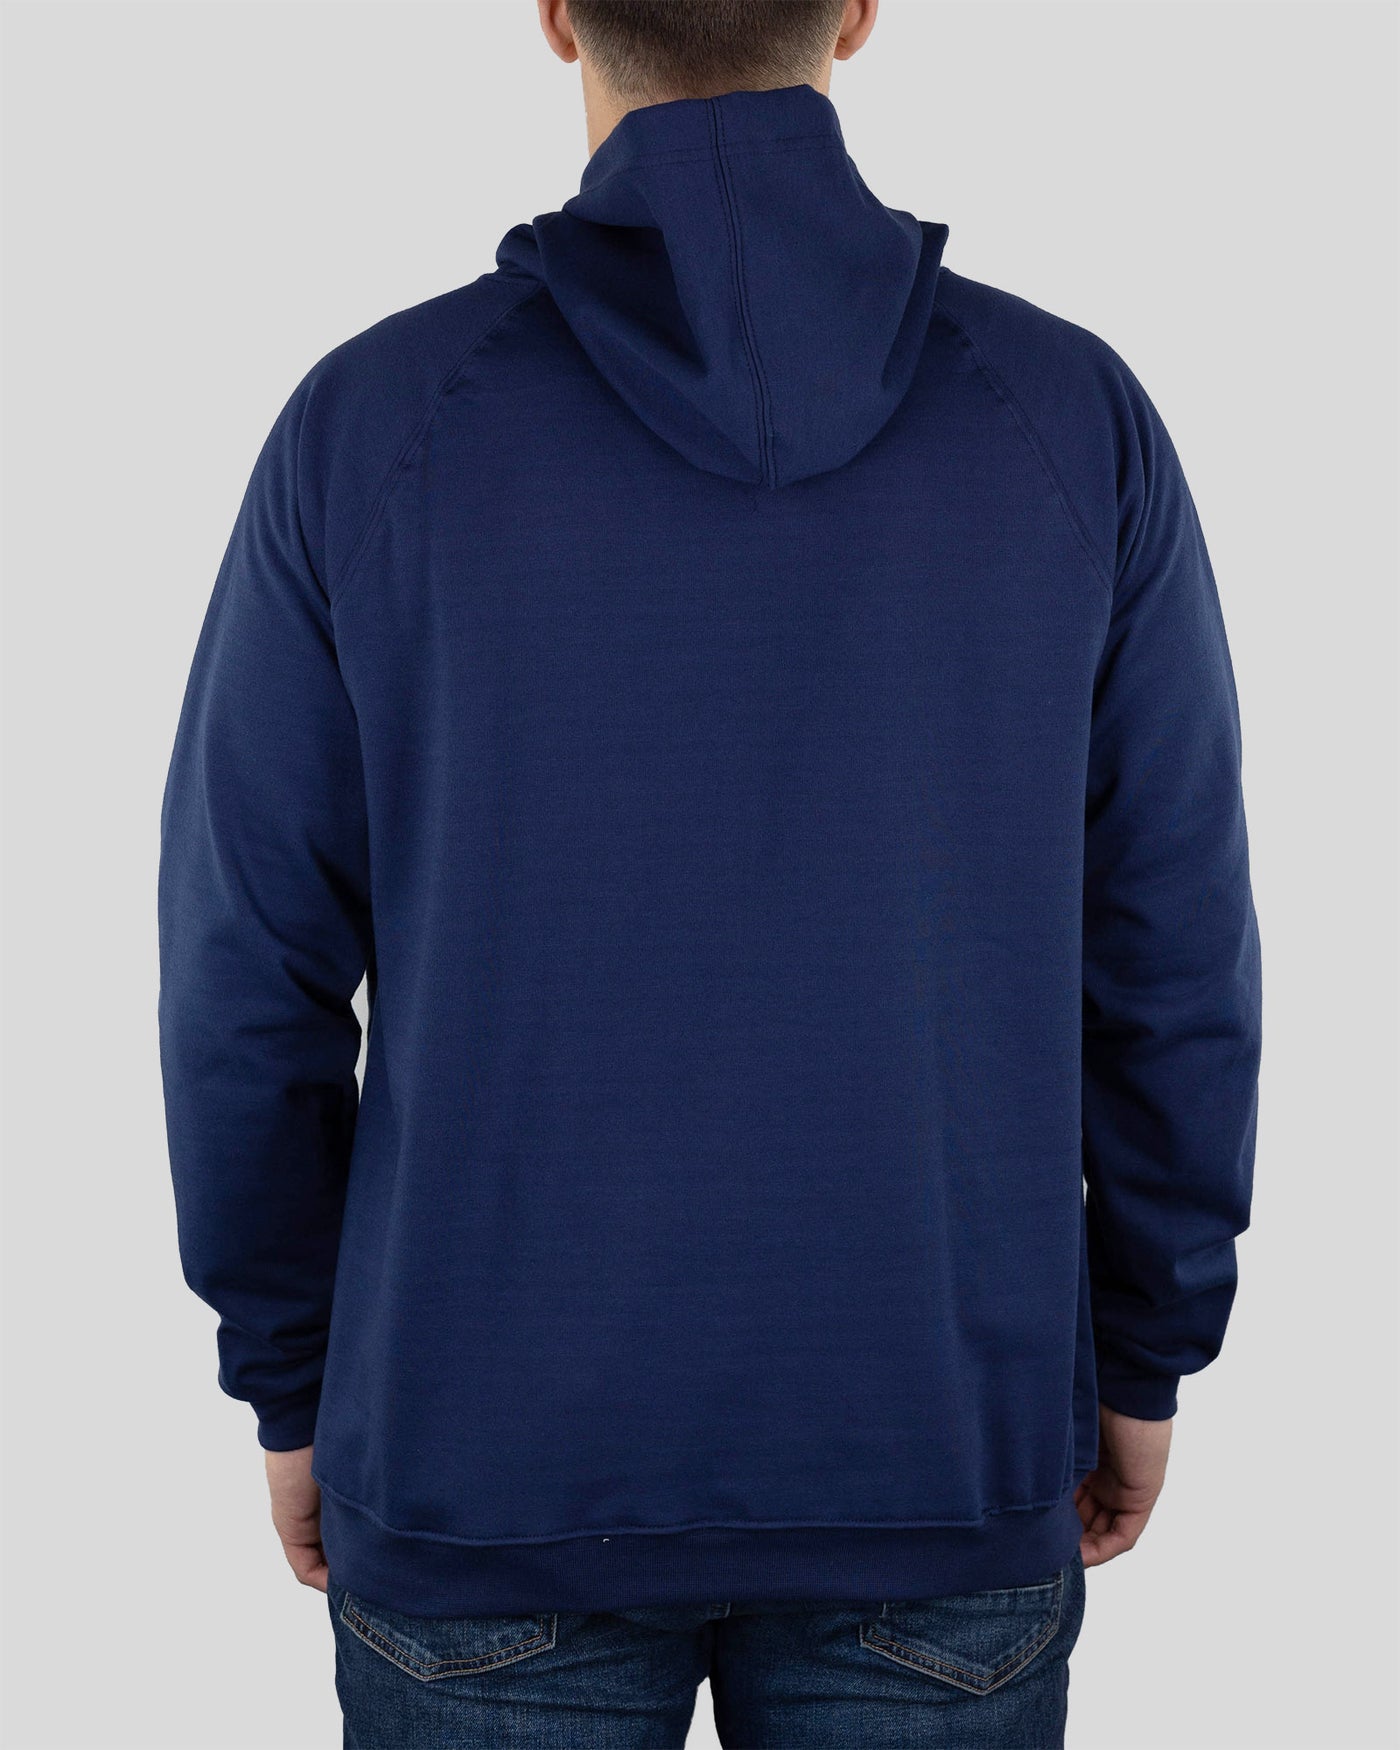 Outfield Fence Hoodie - Houston Astros